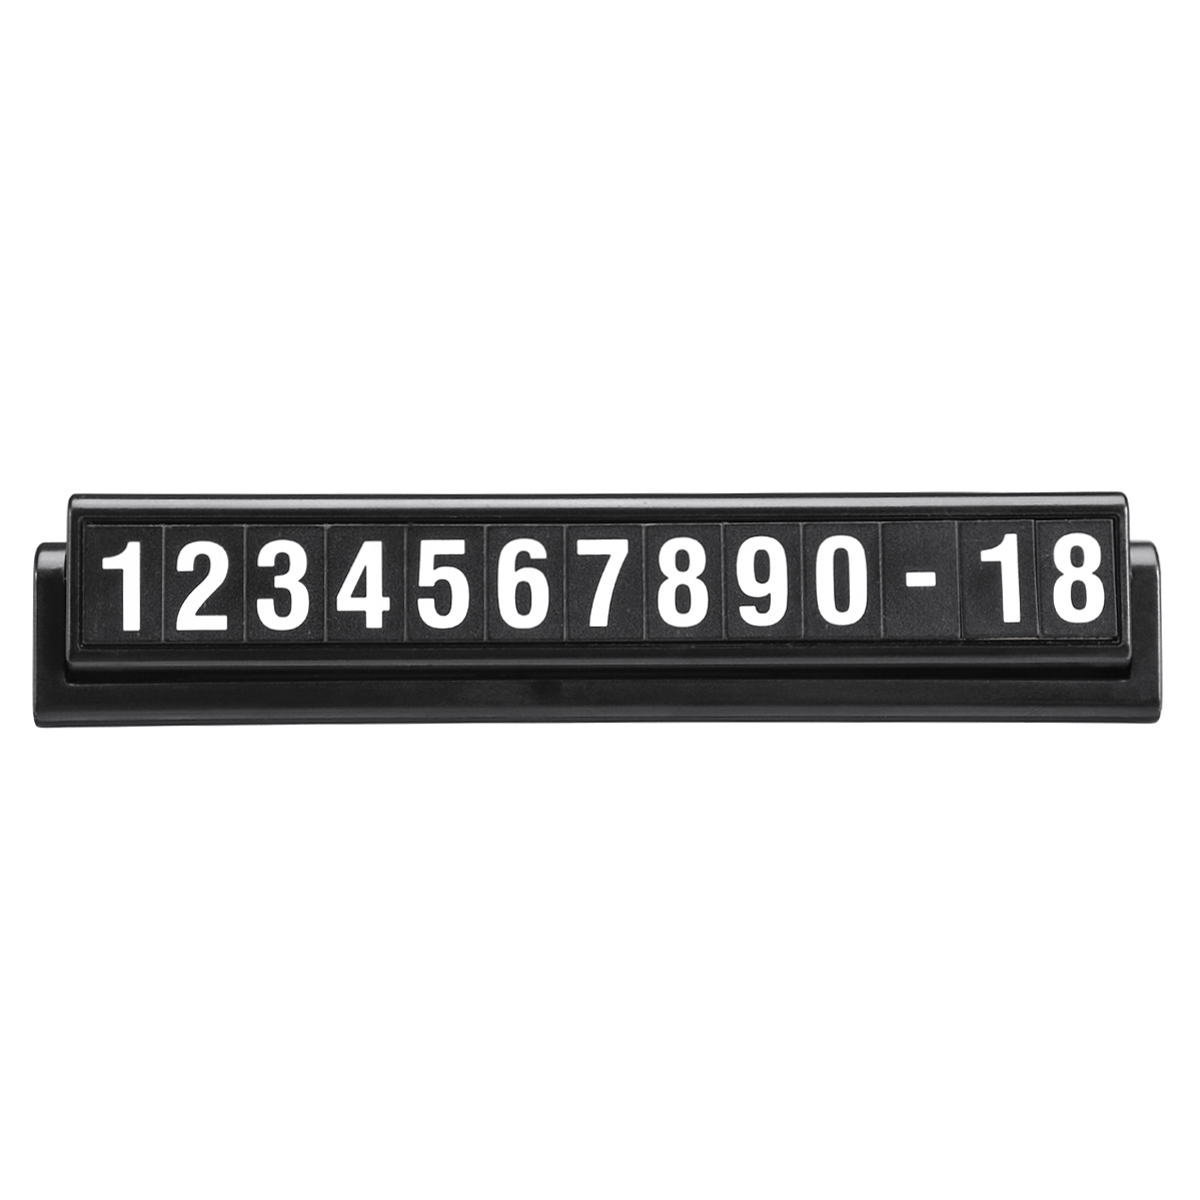 

Universal Car License Plate Frame Phone Number Stop Plate Sticker Luminous Temporary Parking Card Rotatable Hiding